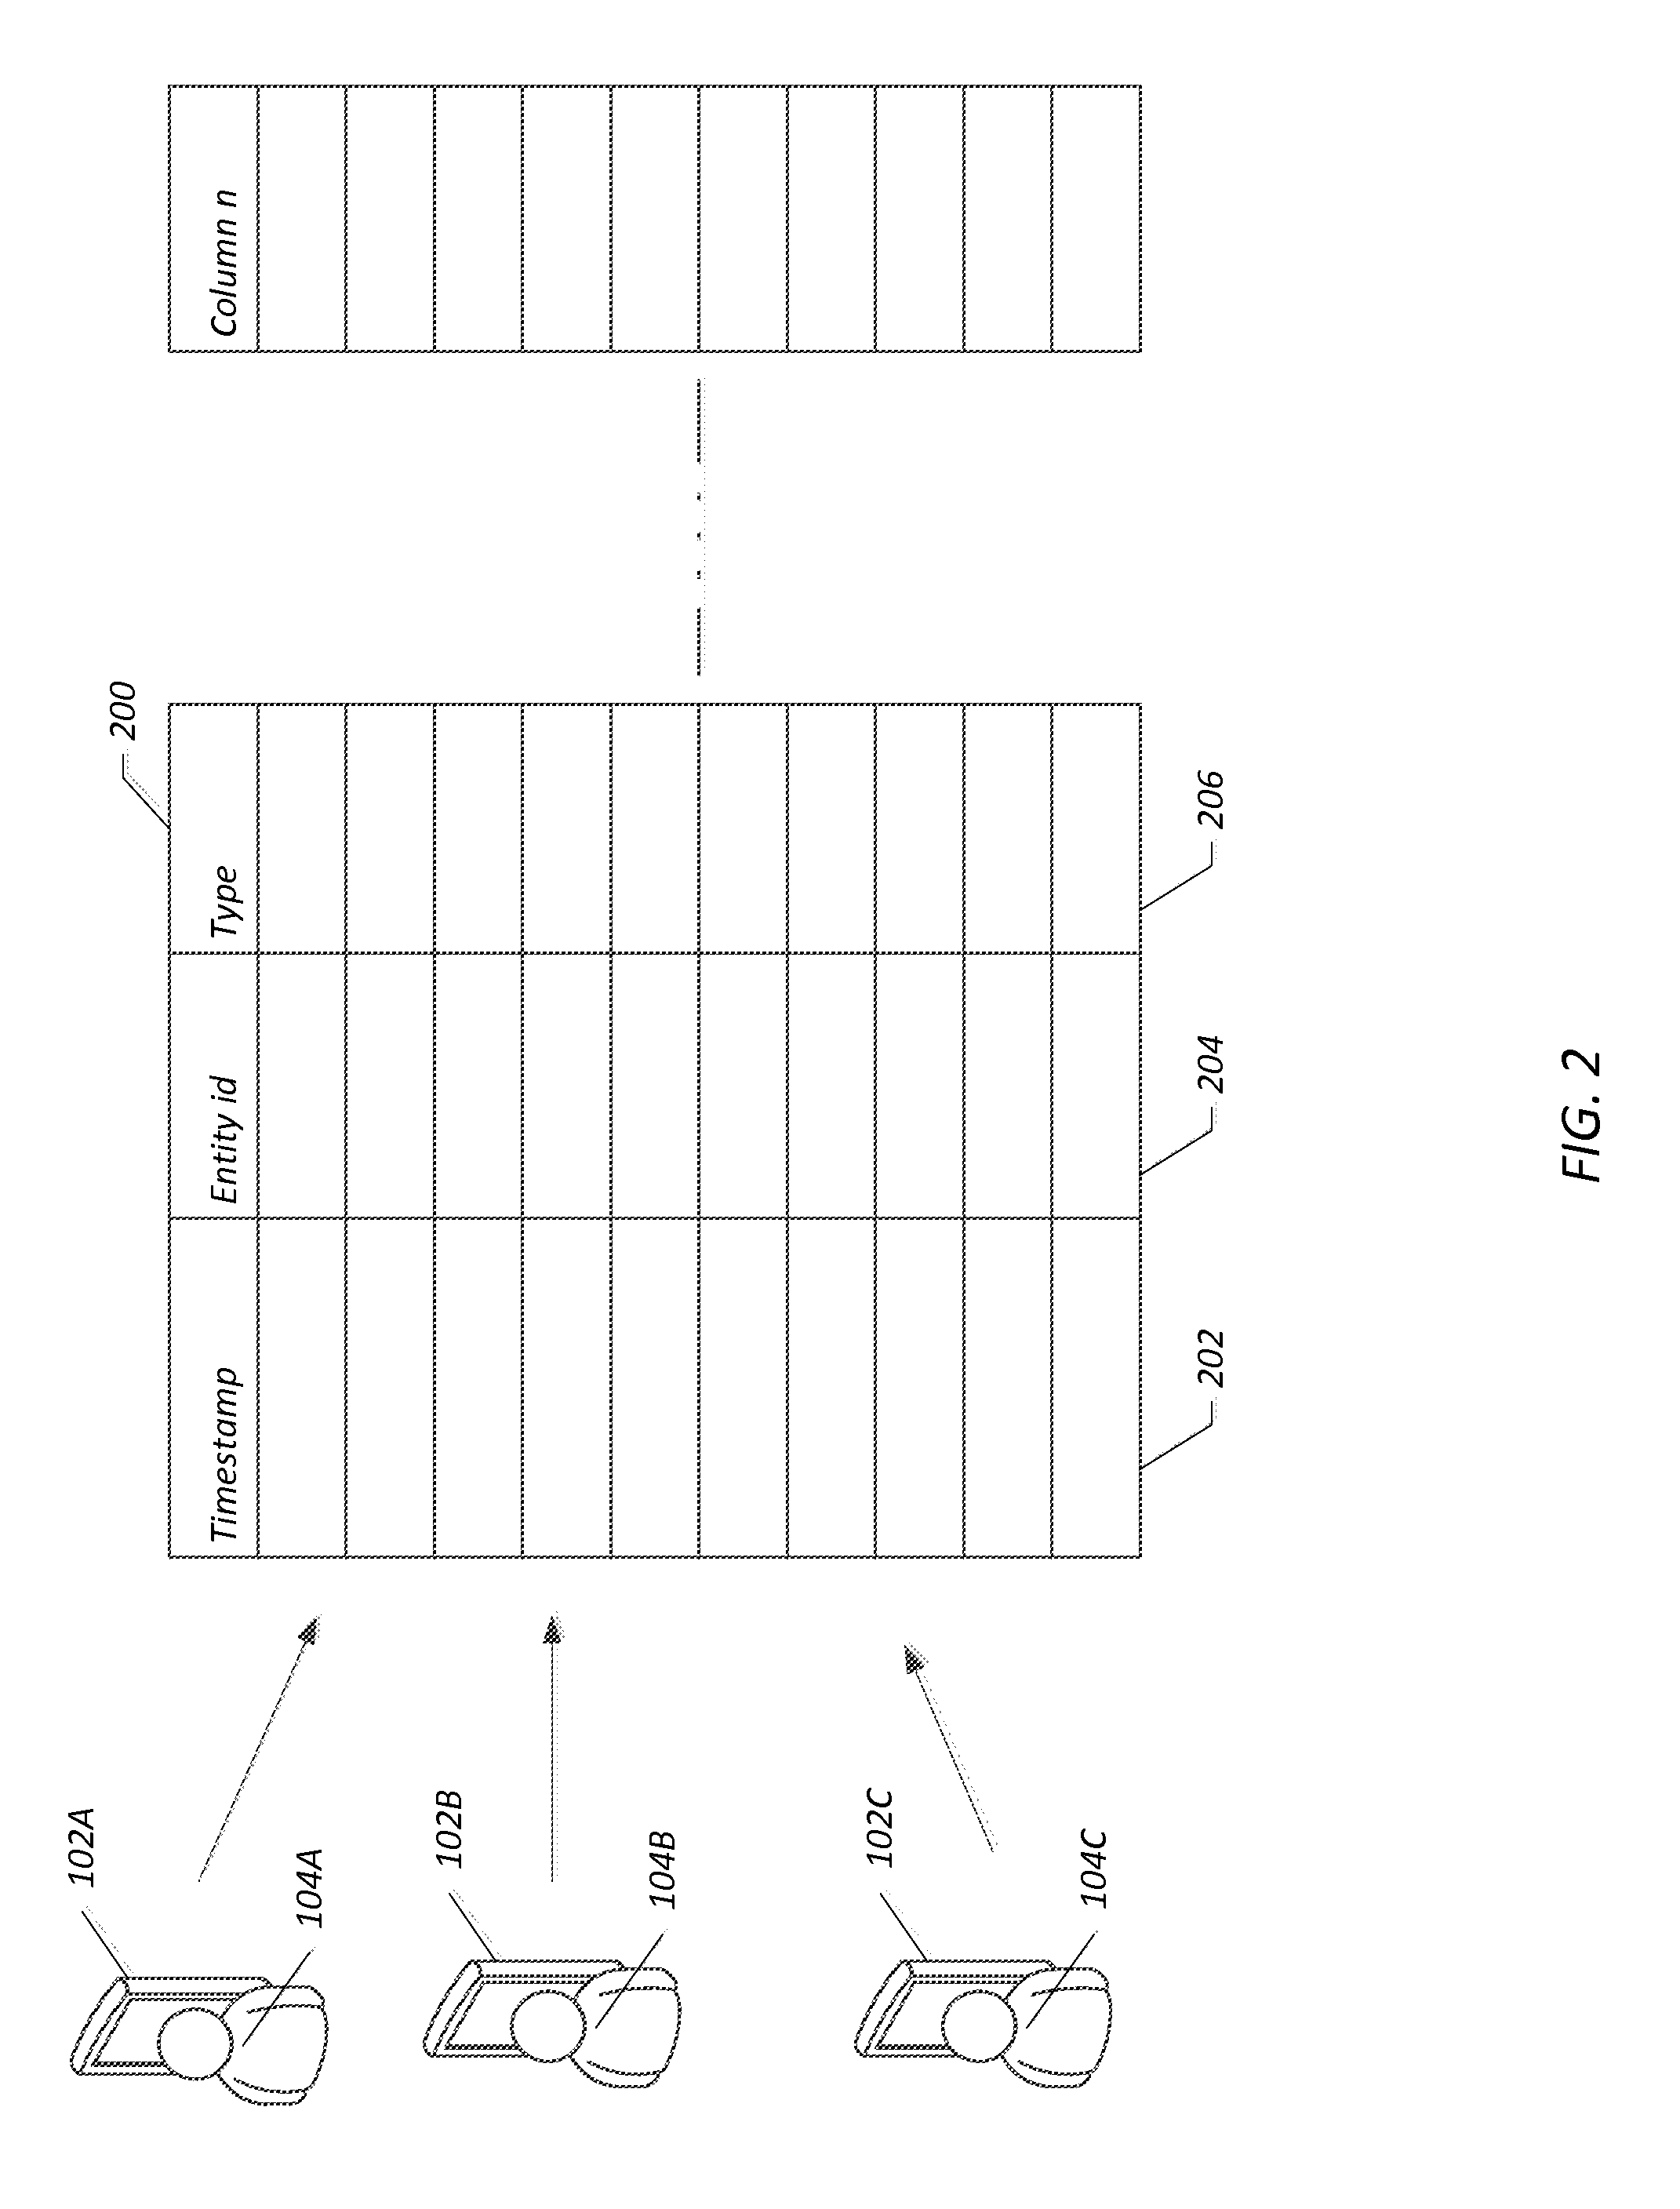 Systems and methods for determining the operating hours of an entity